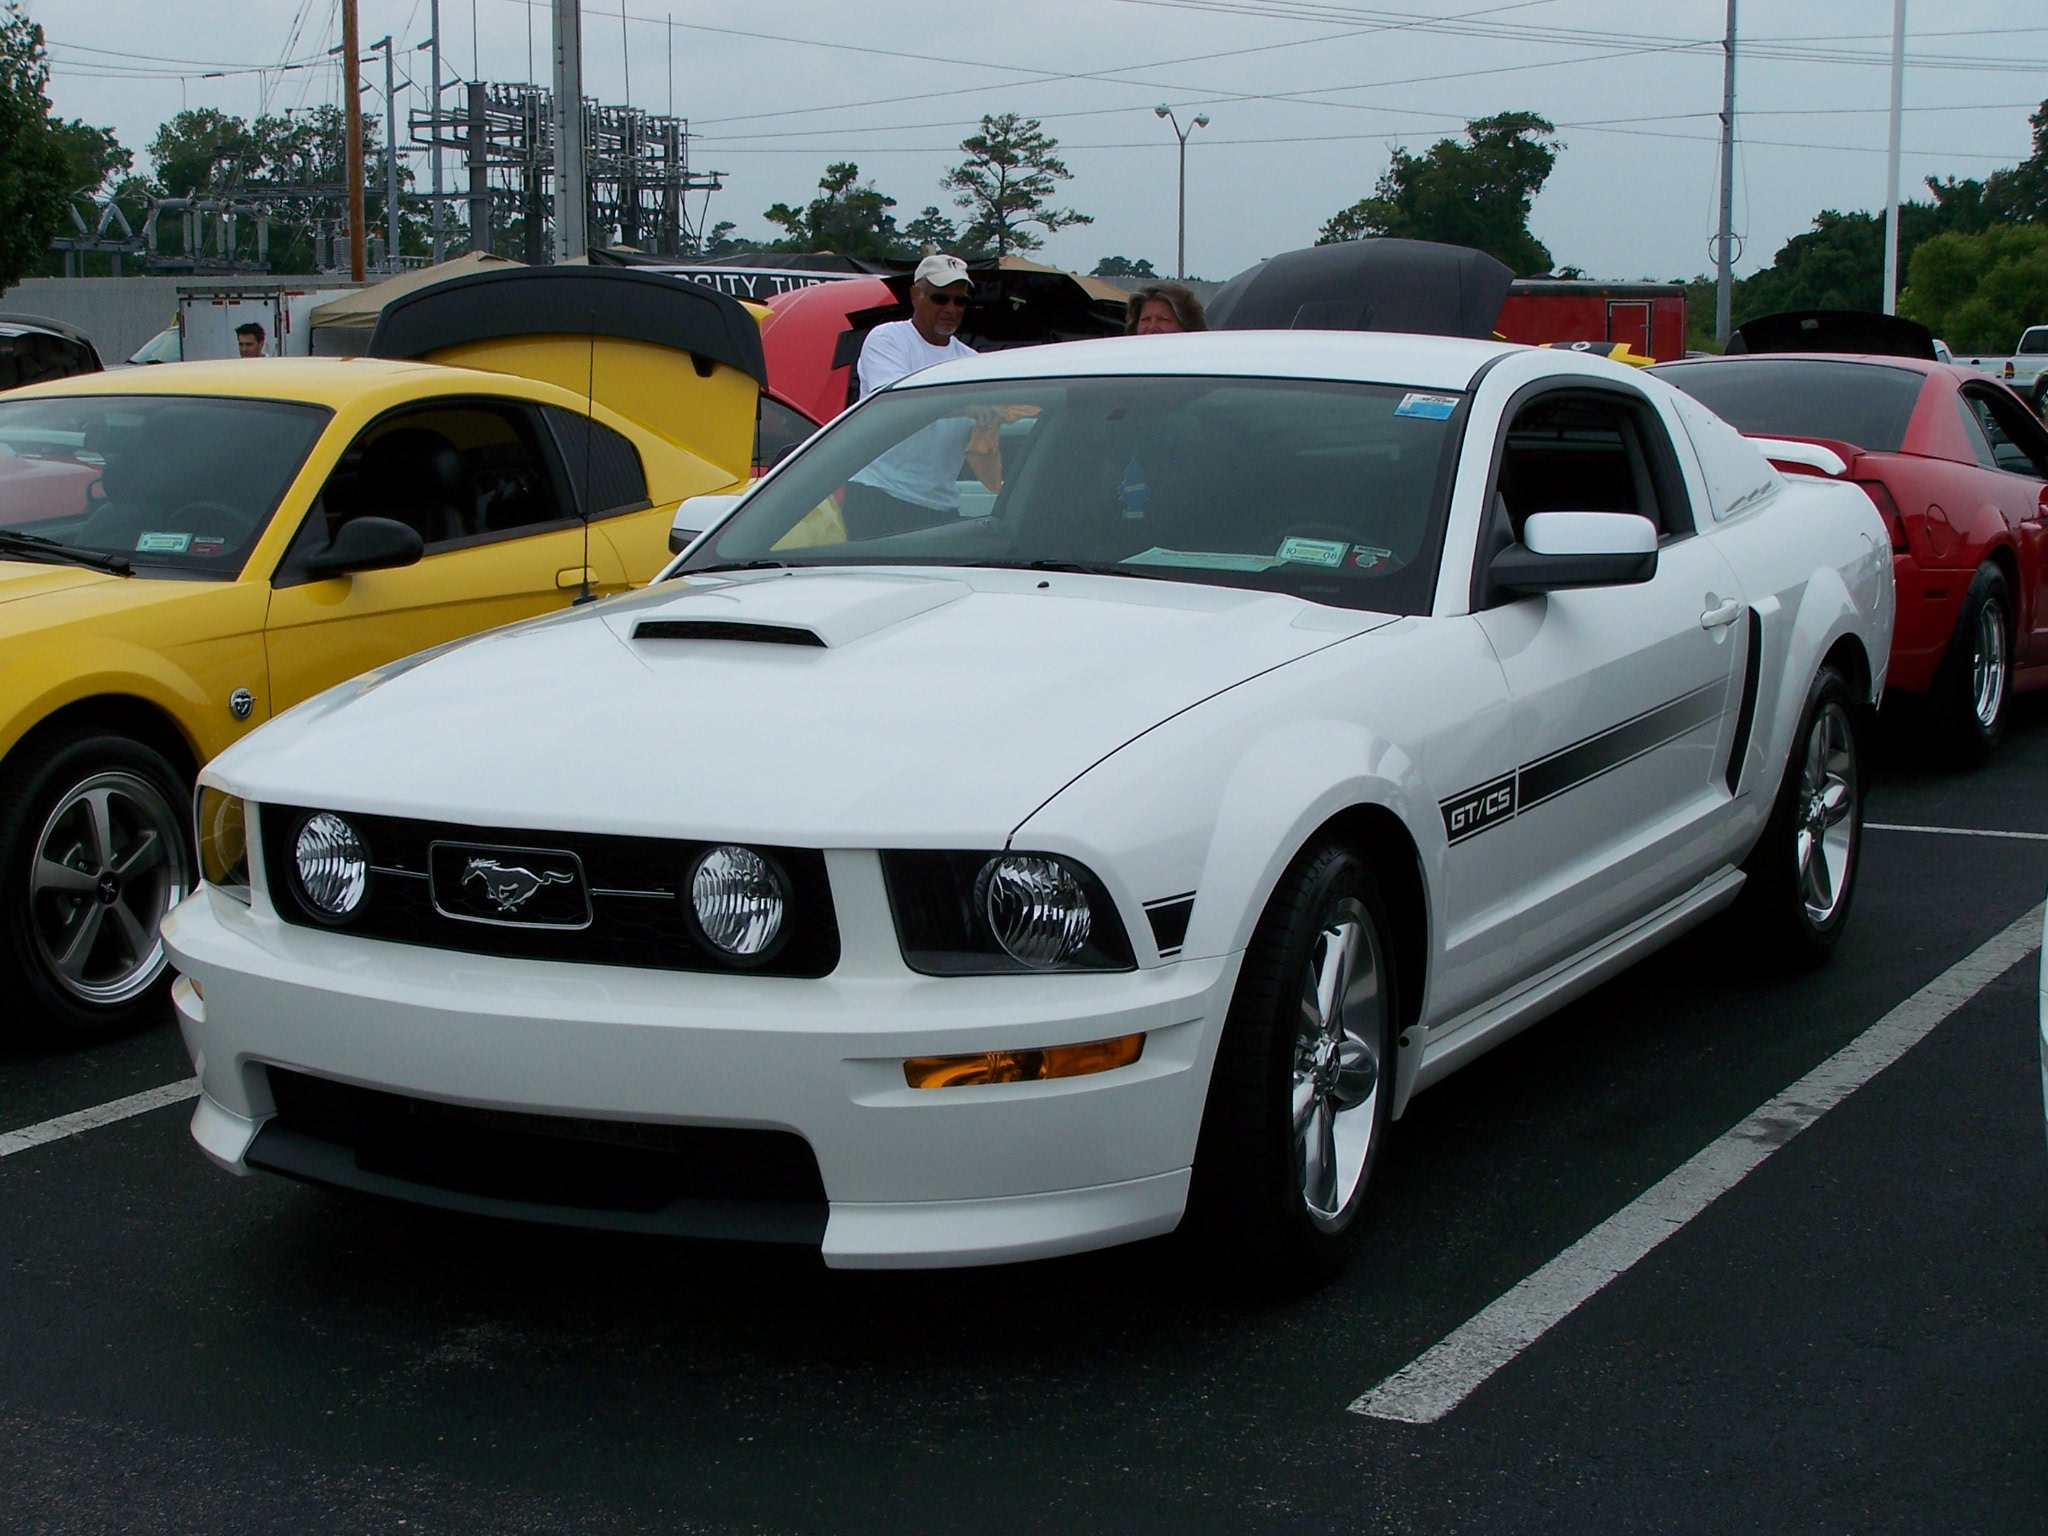 Mustang Week Myrtle Beach SC The Mustang Source Ford Mustang Forums